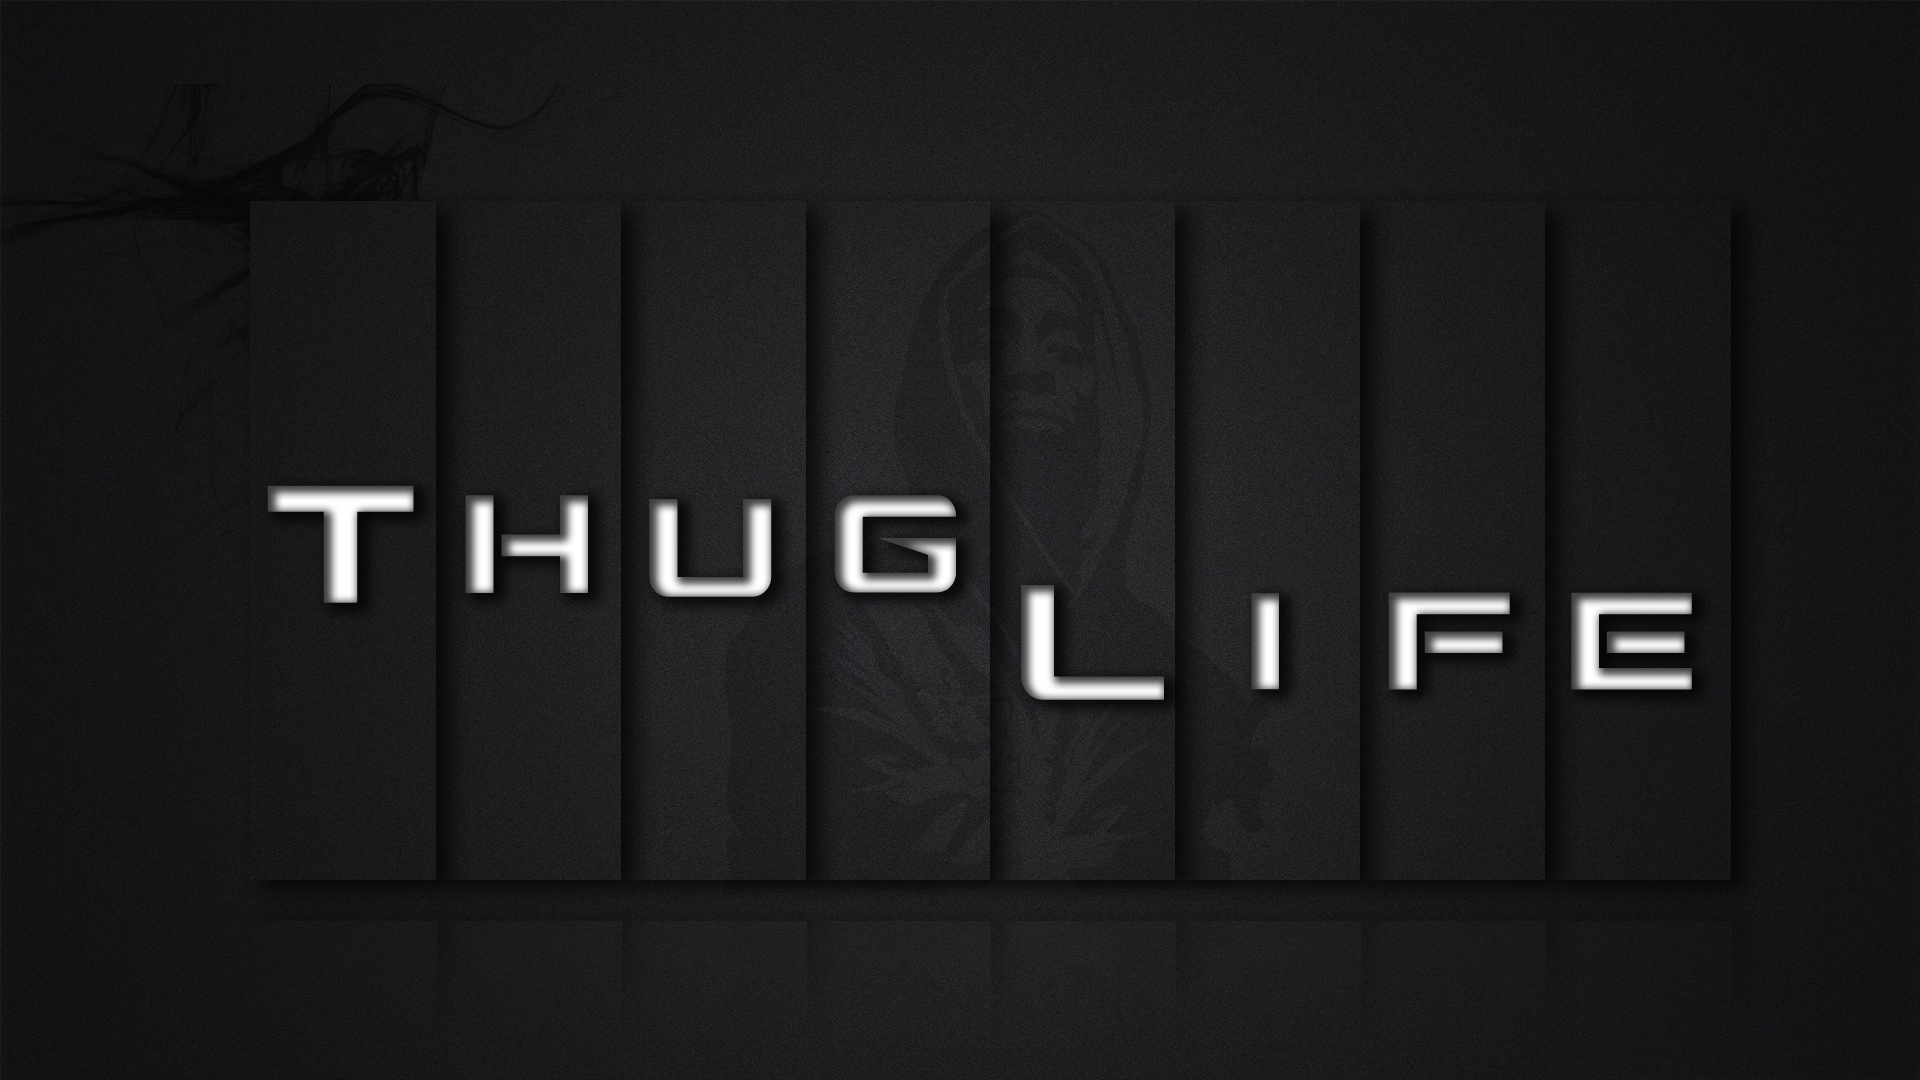  Download thug life wallpaper which is under the life wallpapers